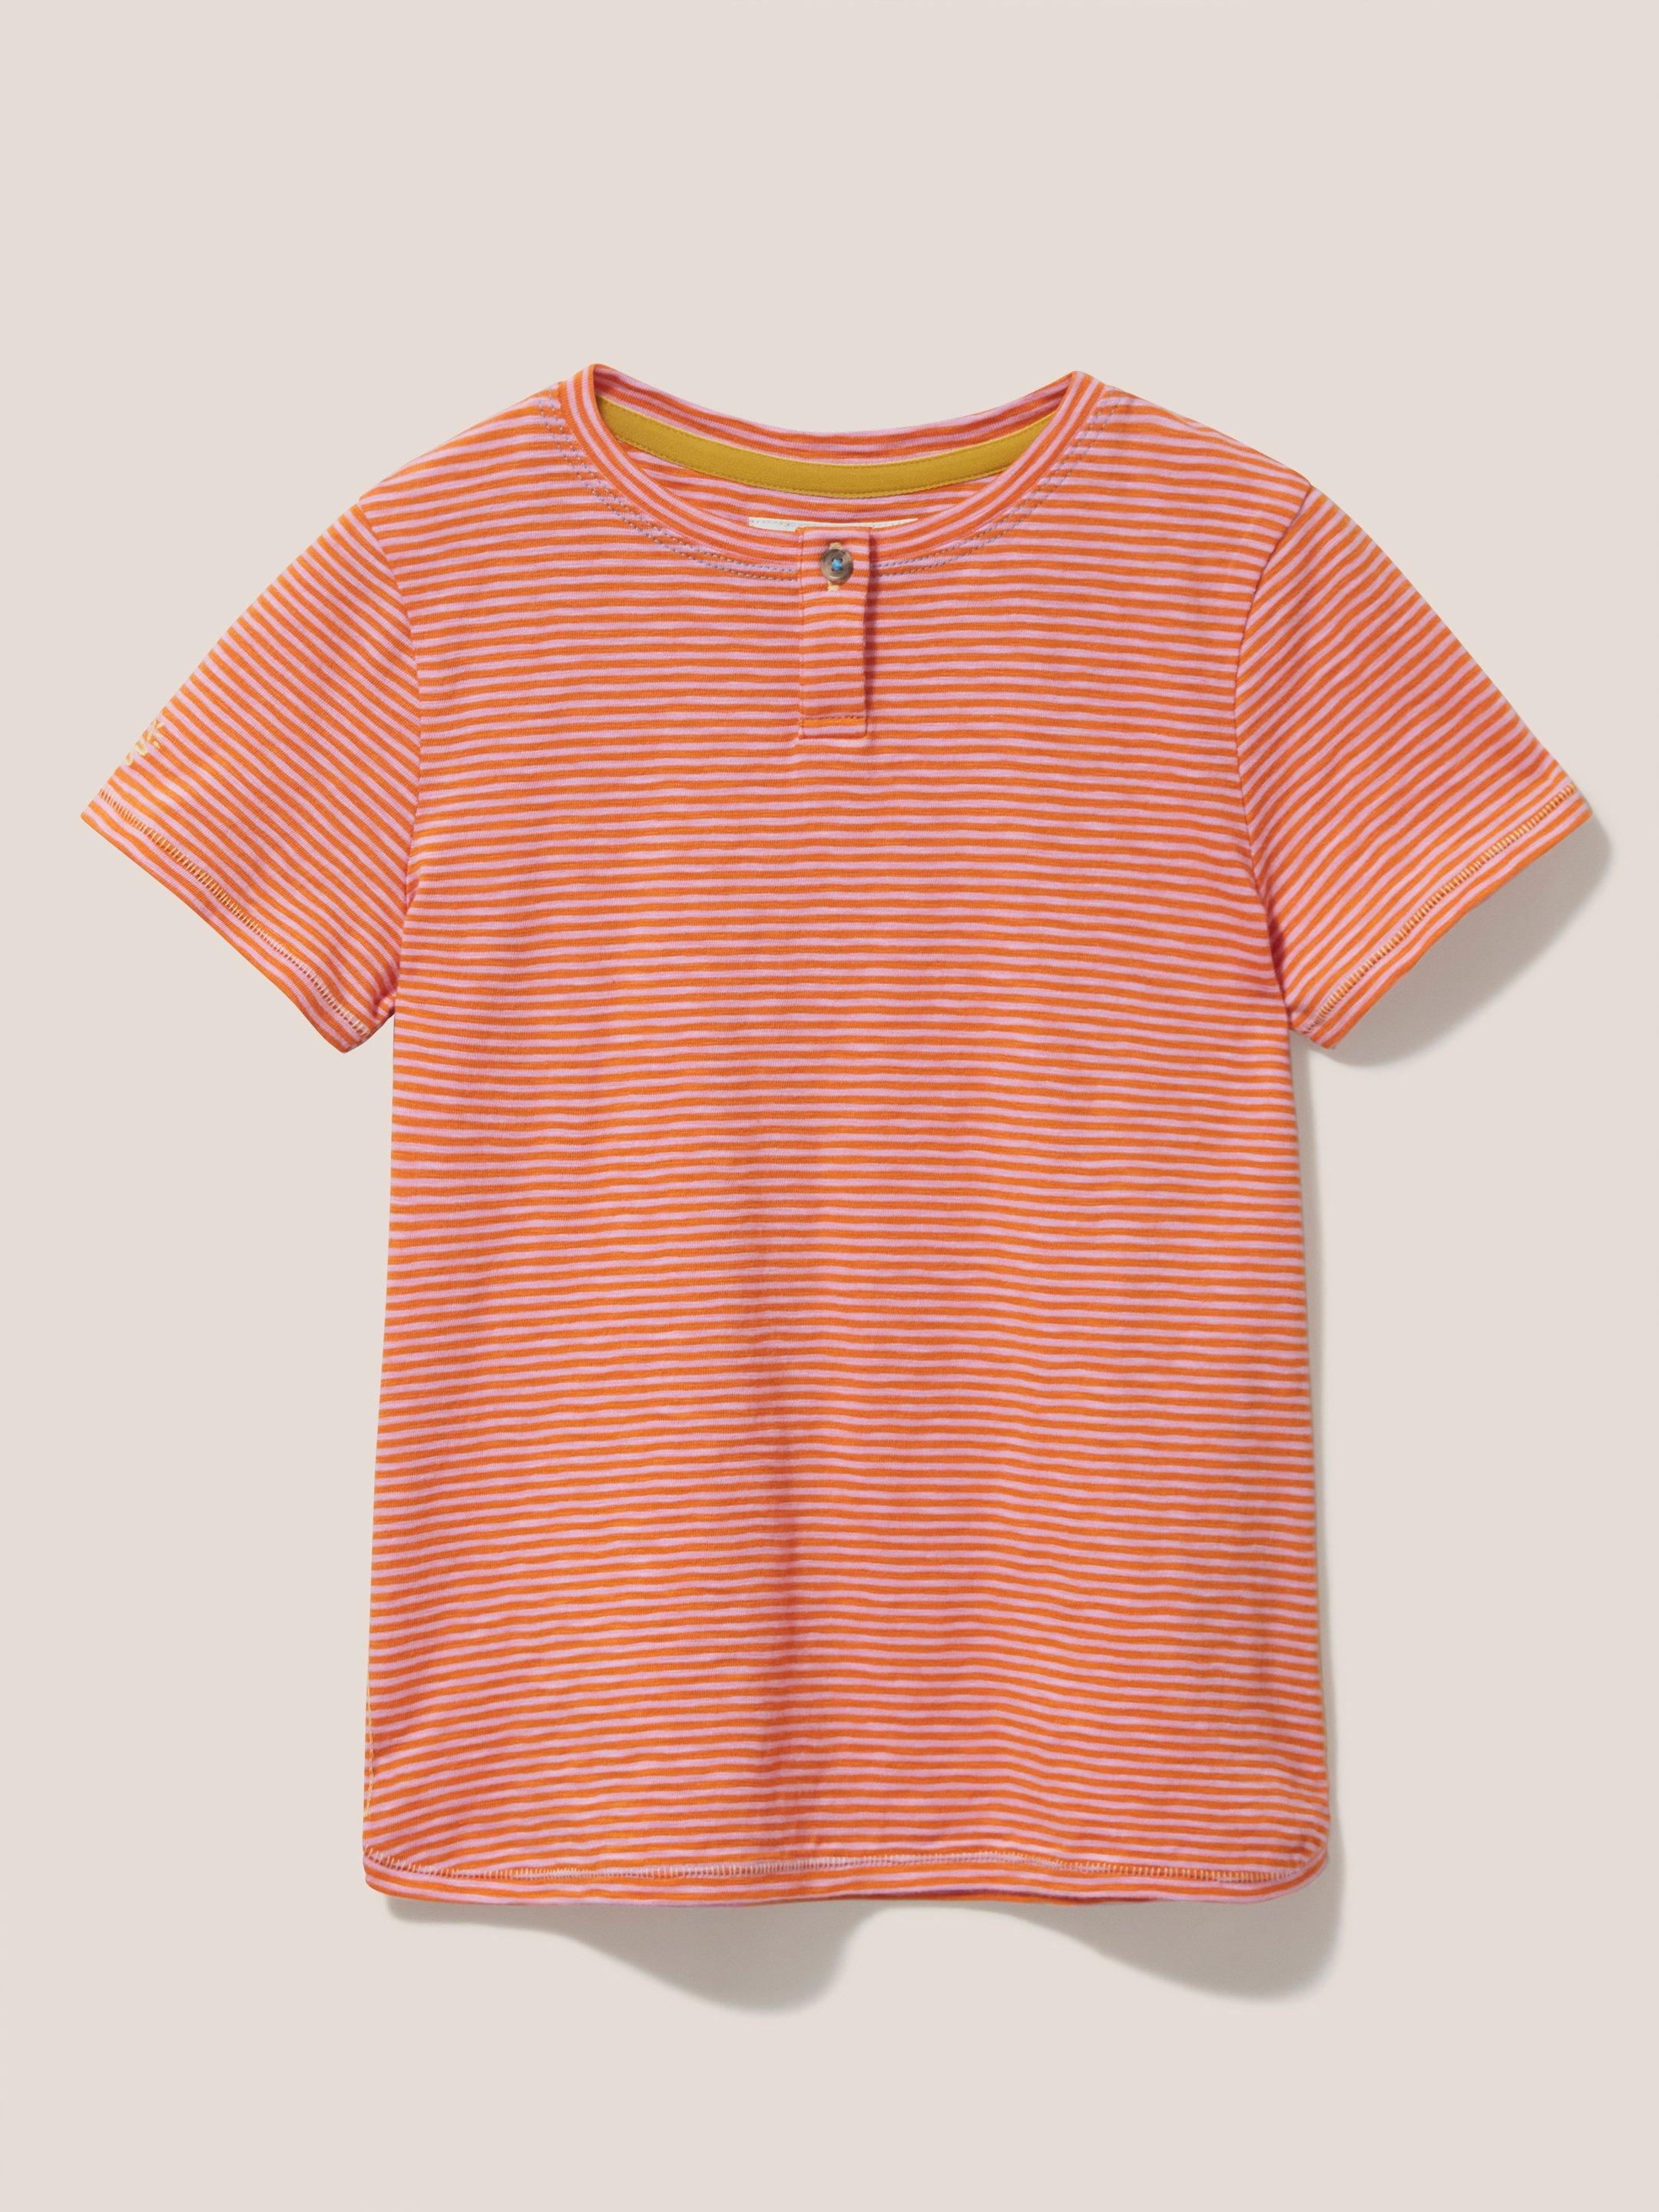 Casey Striped T Shirt in PINK MLT - FLAT FRONT